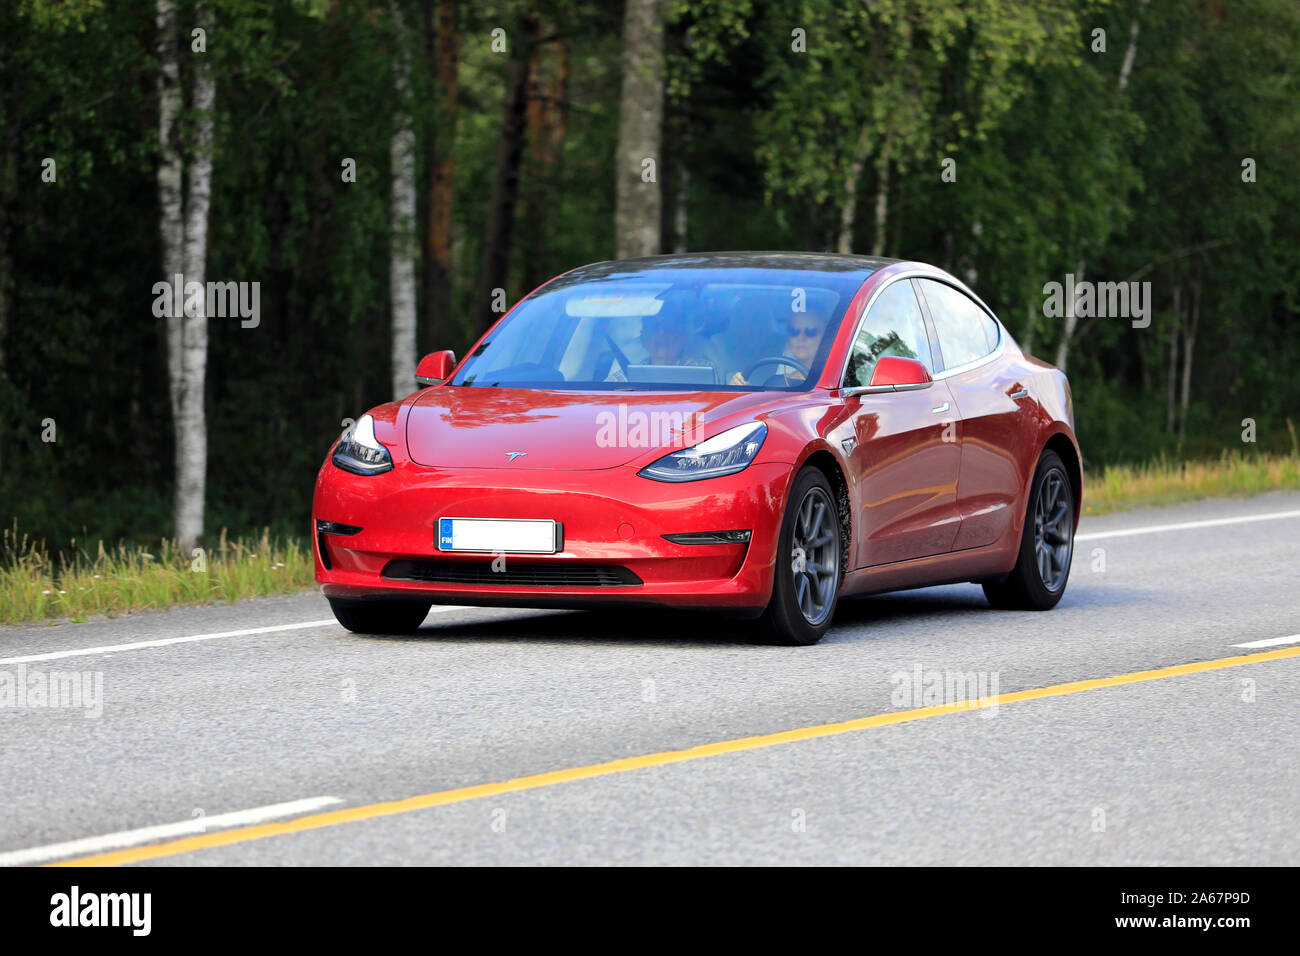 Tesla Model 3 electric car on road. The Model 3 has full self-driving capability that can be optionally enabled. Raseborg, Finland. July 12, 19. Stock Photo